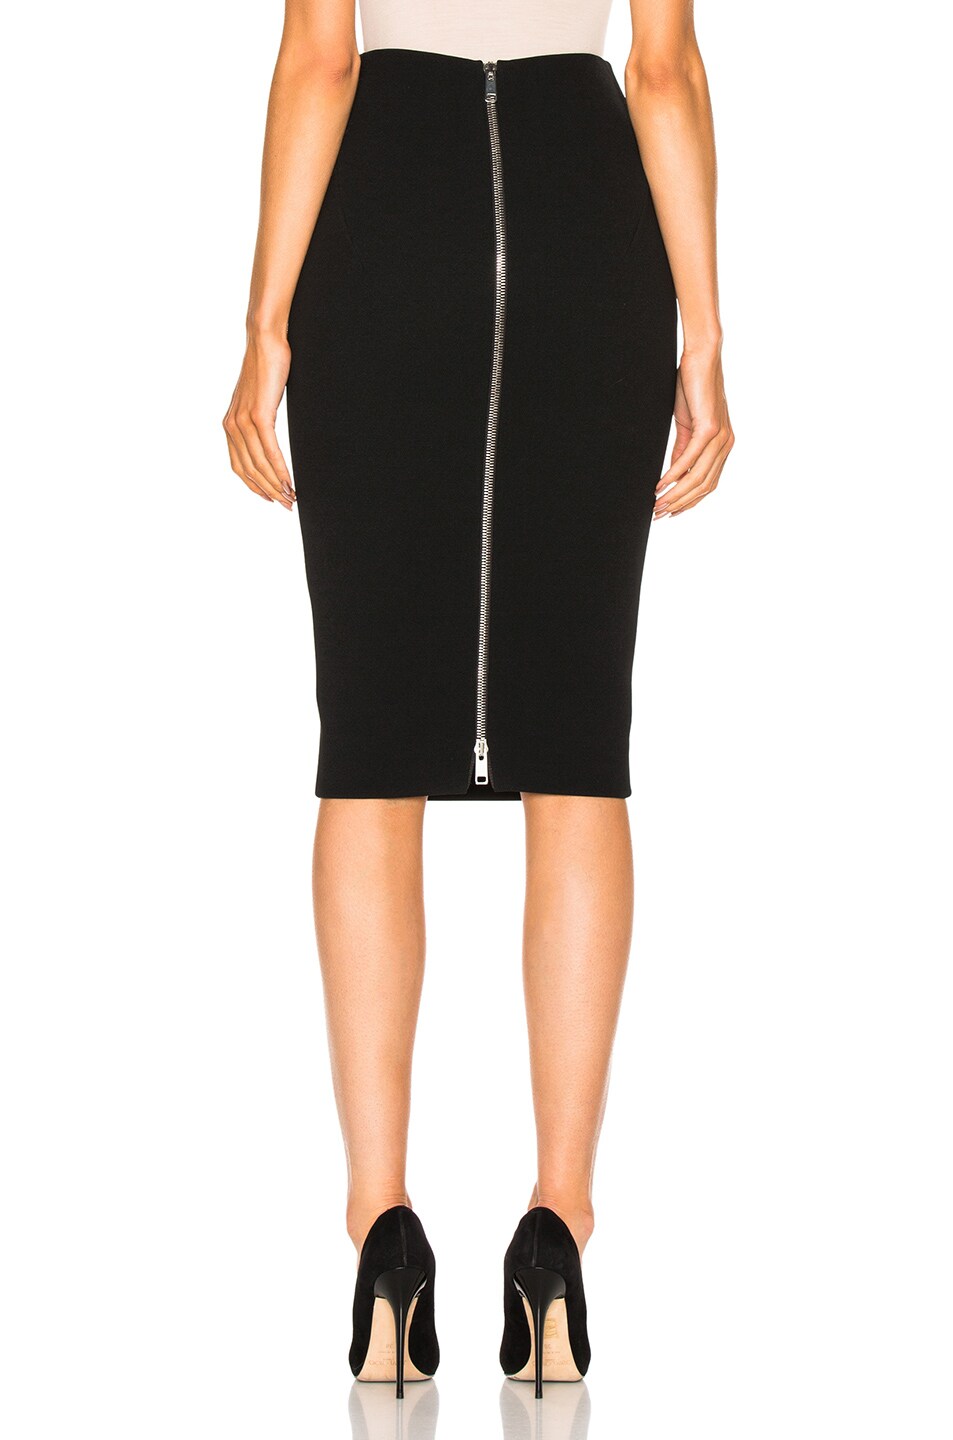 VICTORIA BECKHAM Double Crepe High Waisted Pencil Skirt in Black | ModeSens